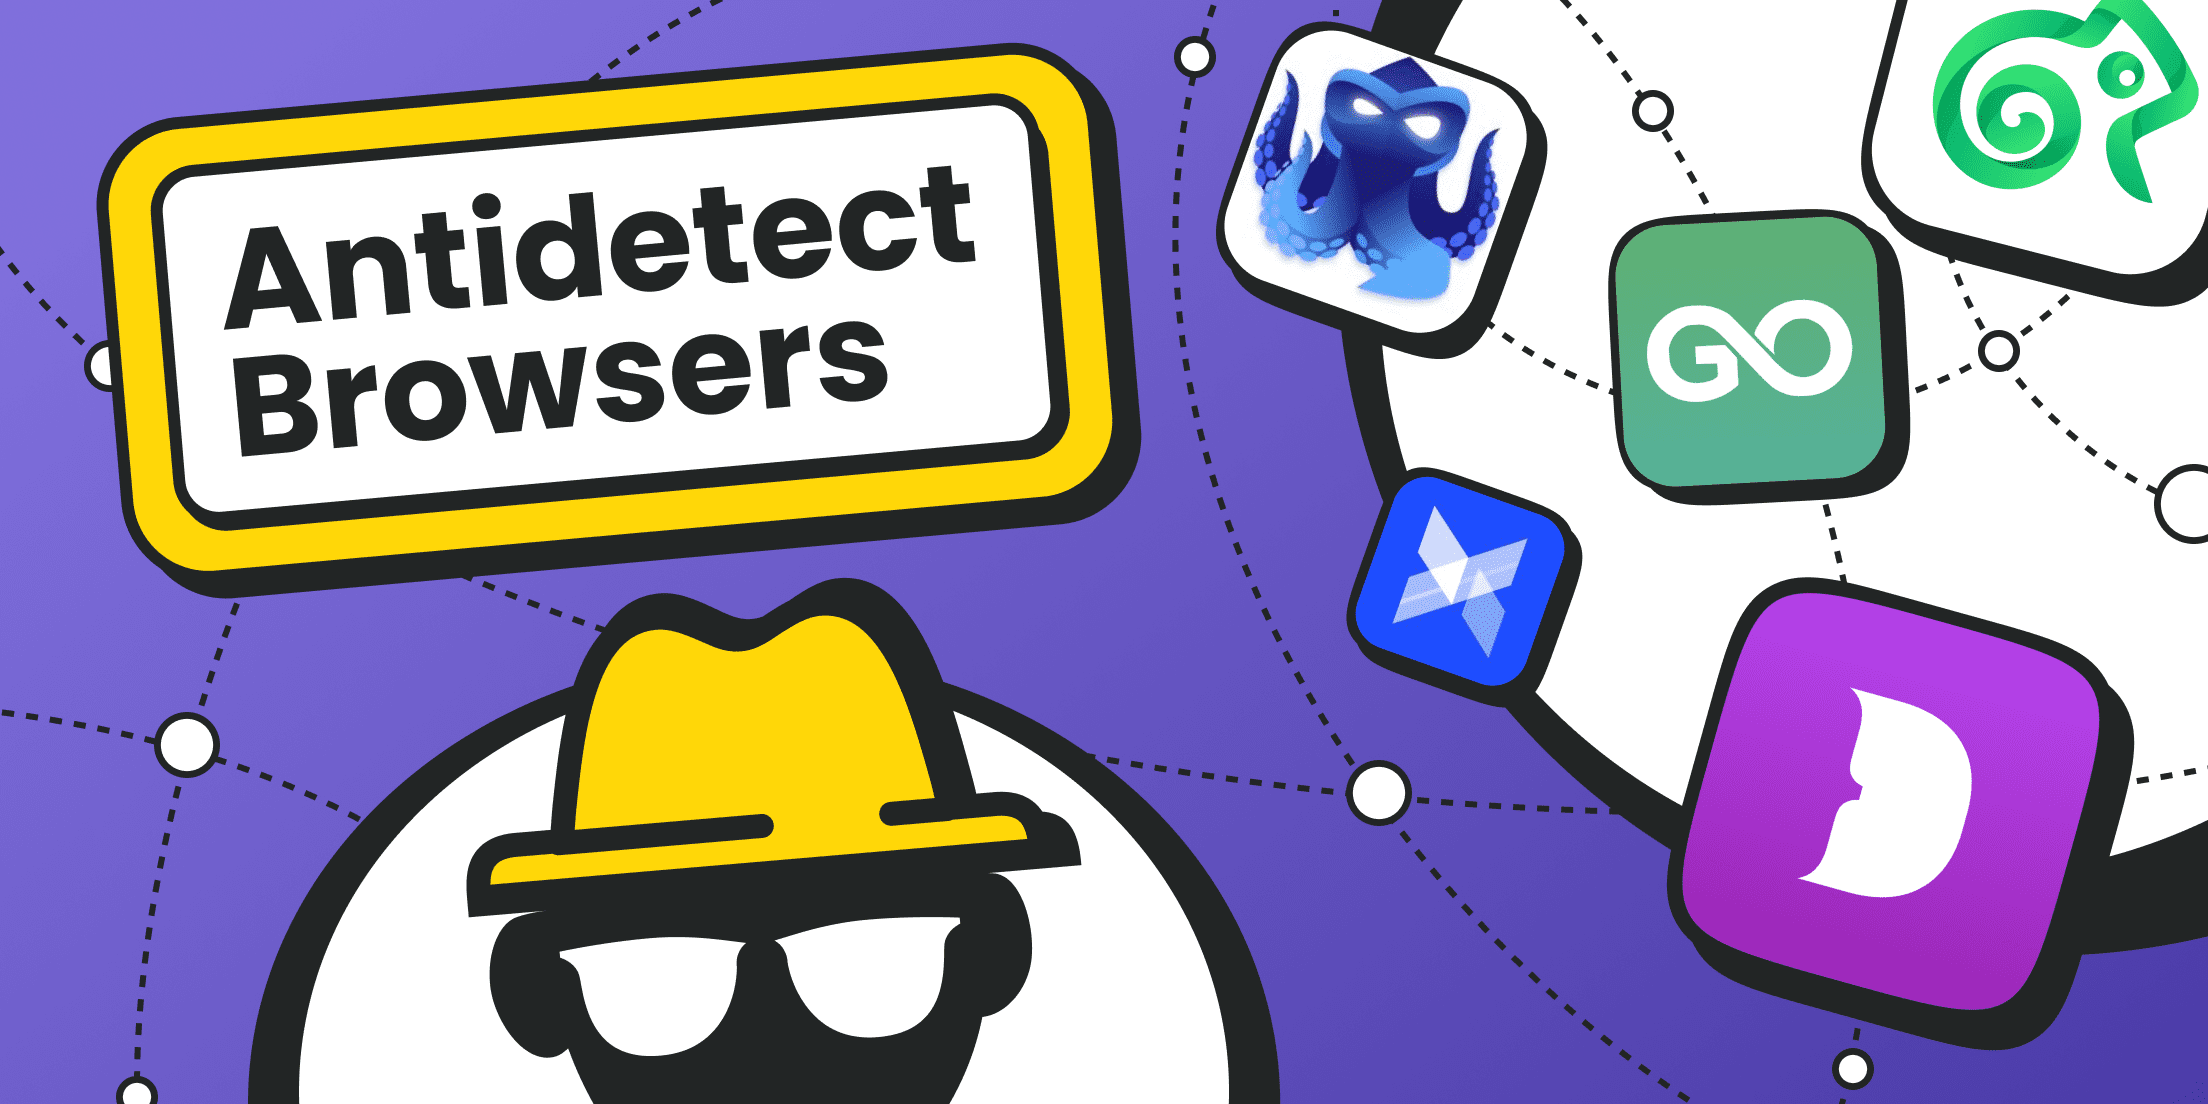 Overview of Antidetect Browsers: Top 7 Solutions